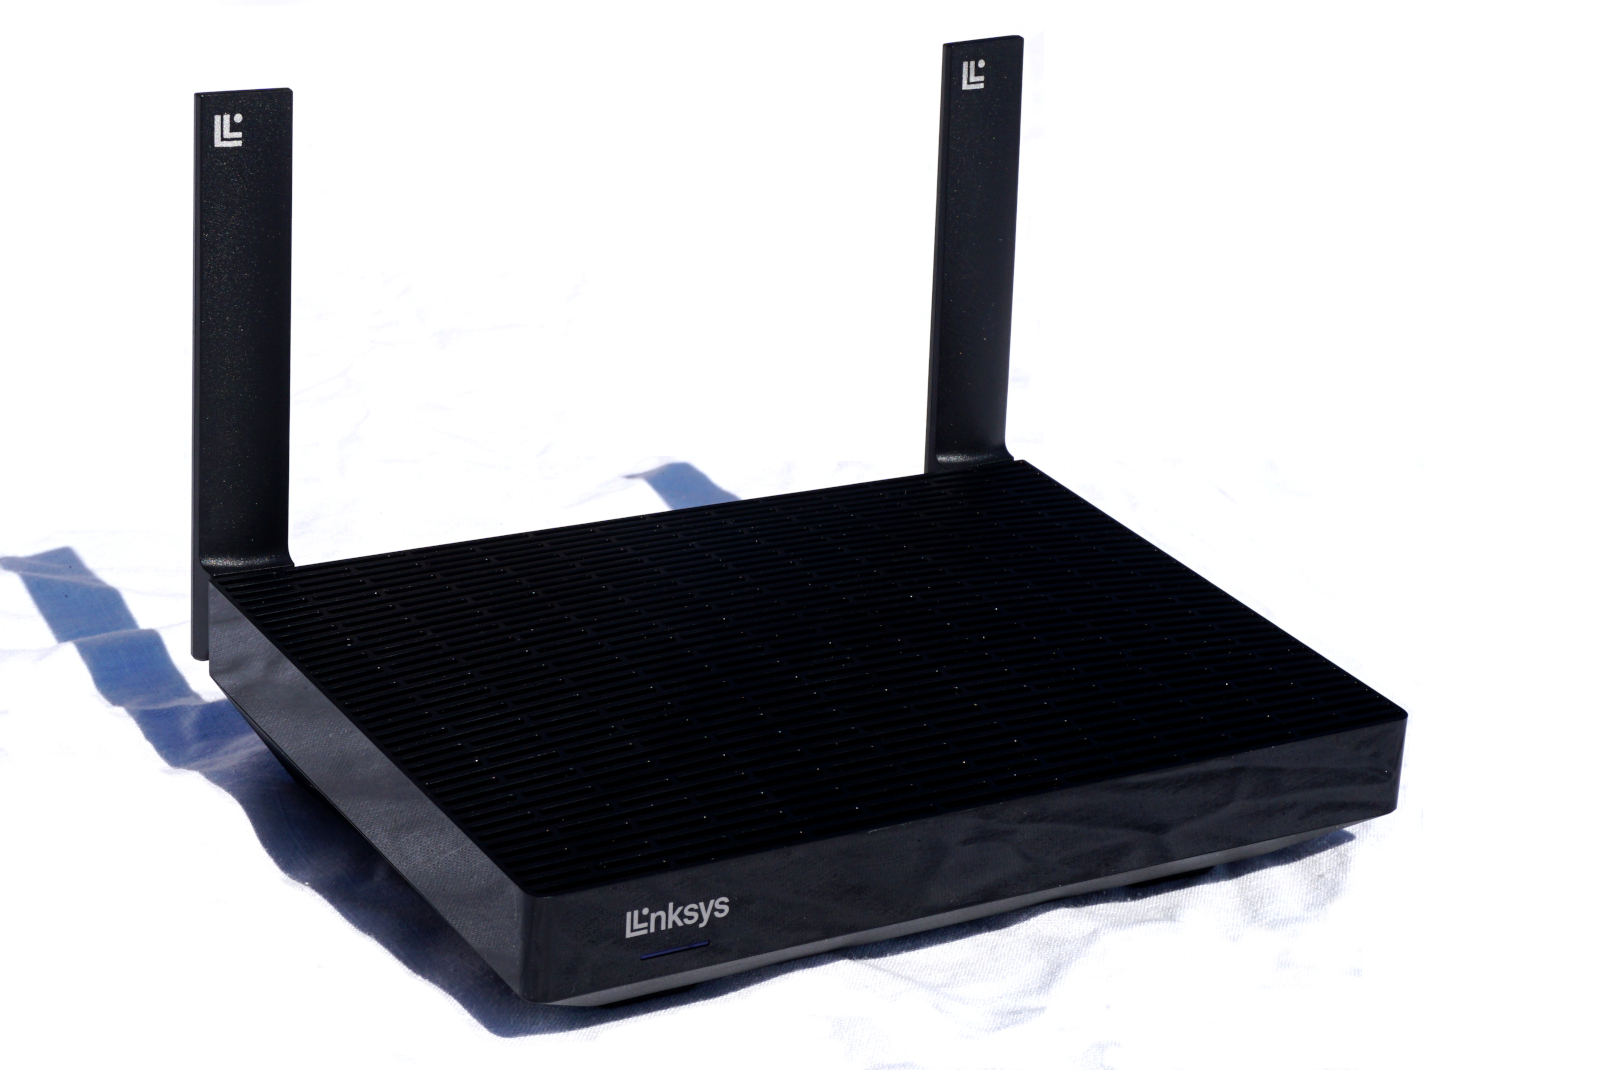 Image of Linksys Hydra Pro 6 router